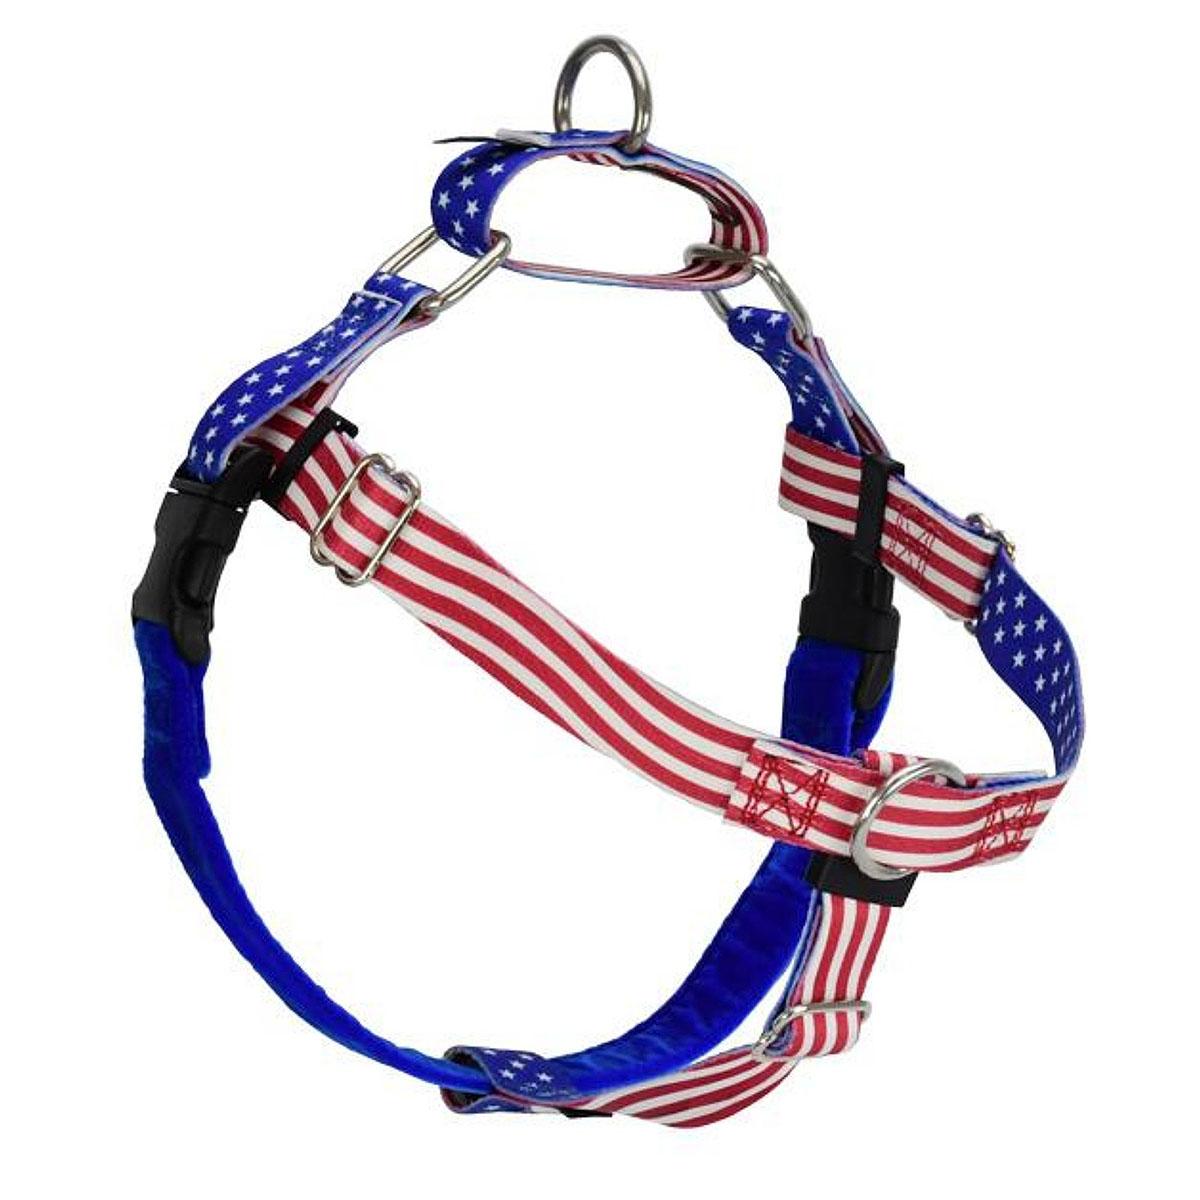 2 Hounds Design EarthStyle Freedom No-Pull Dog Harness - Star Spangled